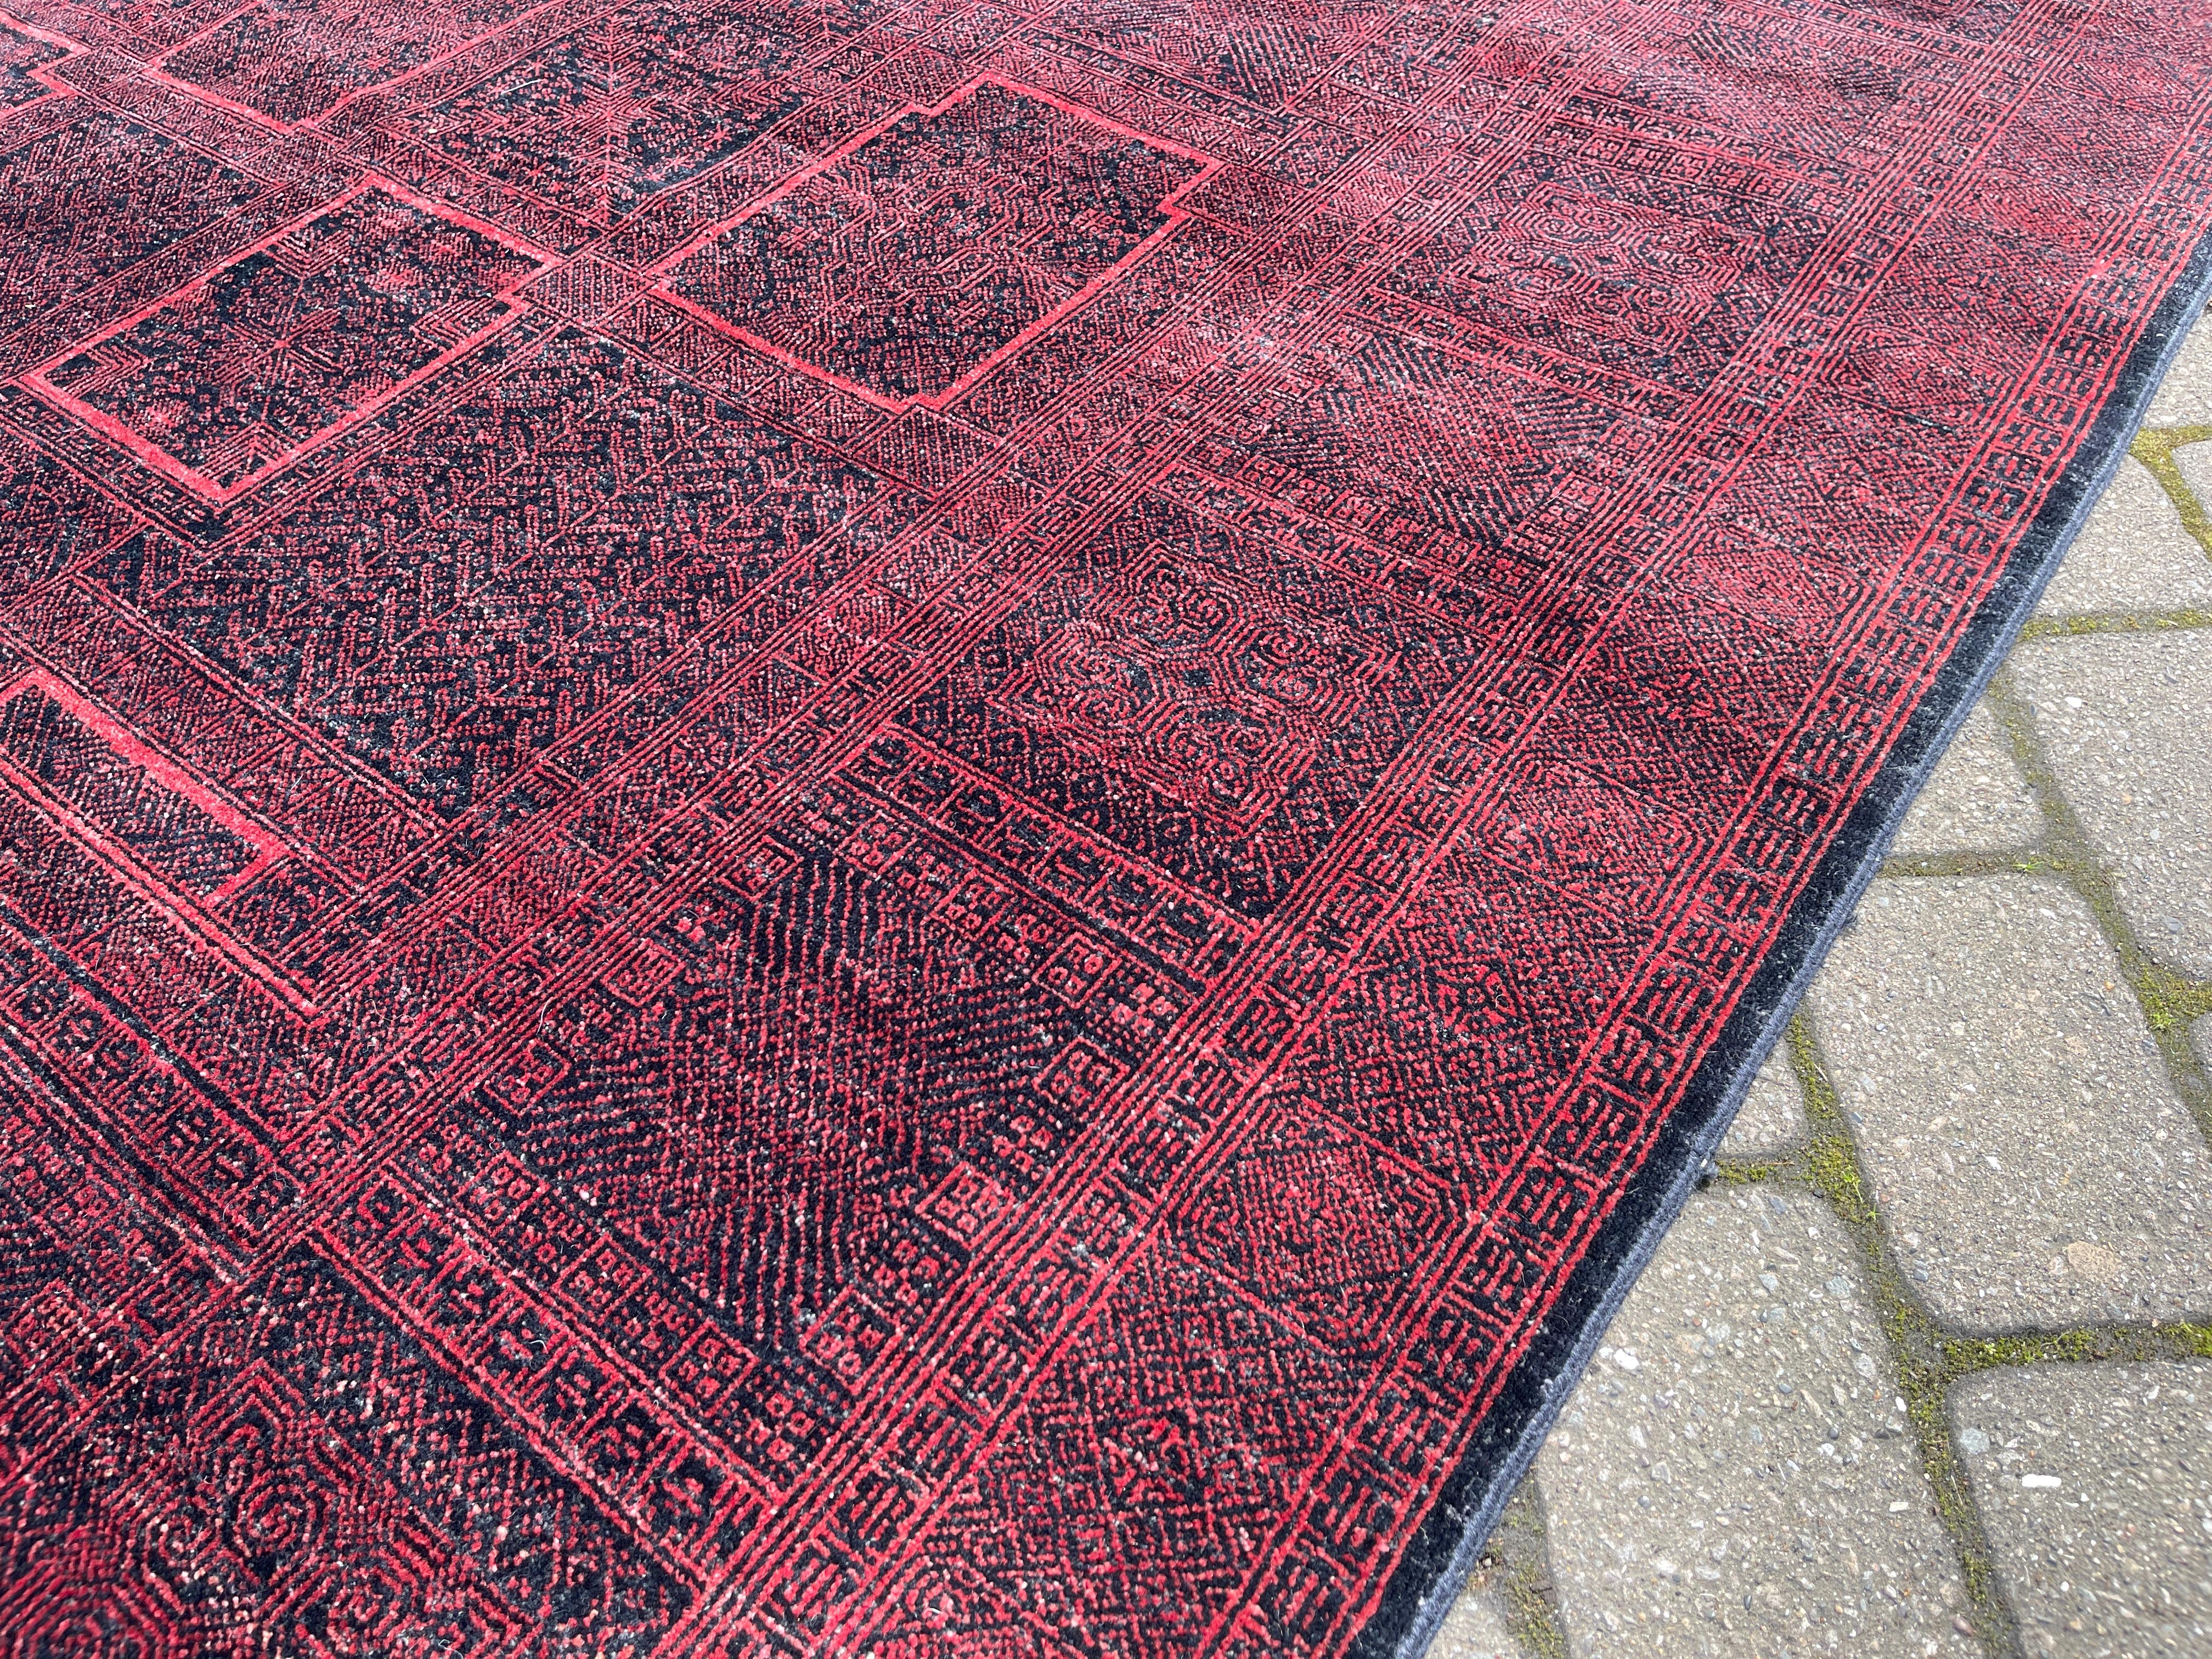 This Indian rug features a reds floral design  allowing you to switch up your decor. Add a touch of style to any room while also having the option to change things up to suit your mood. Beautiful and versatile, this rug is a must-have for any home.